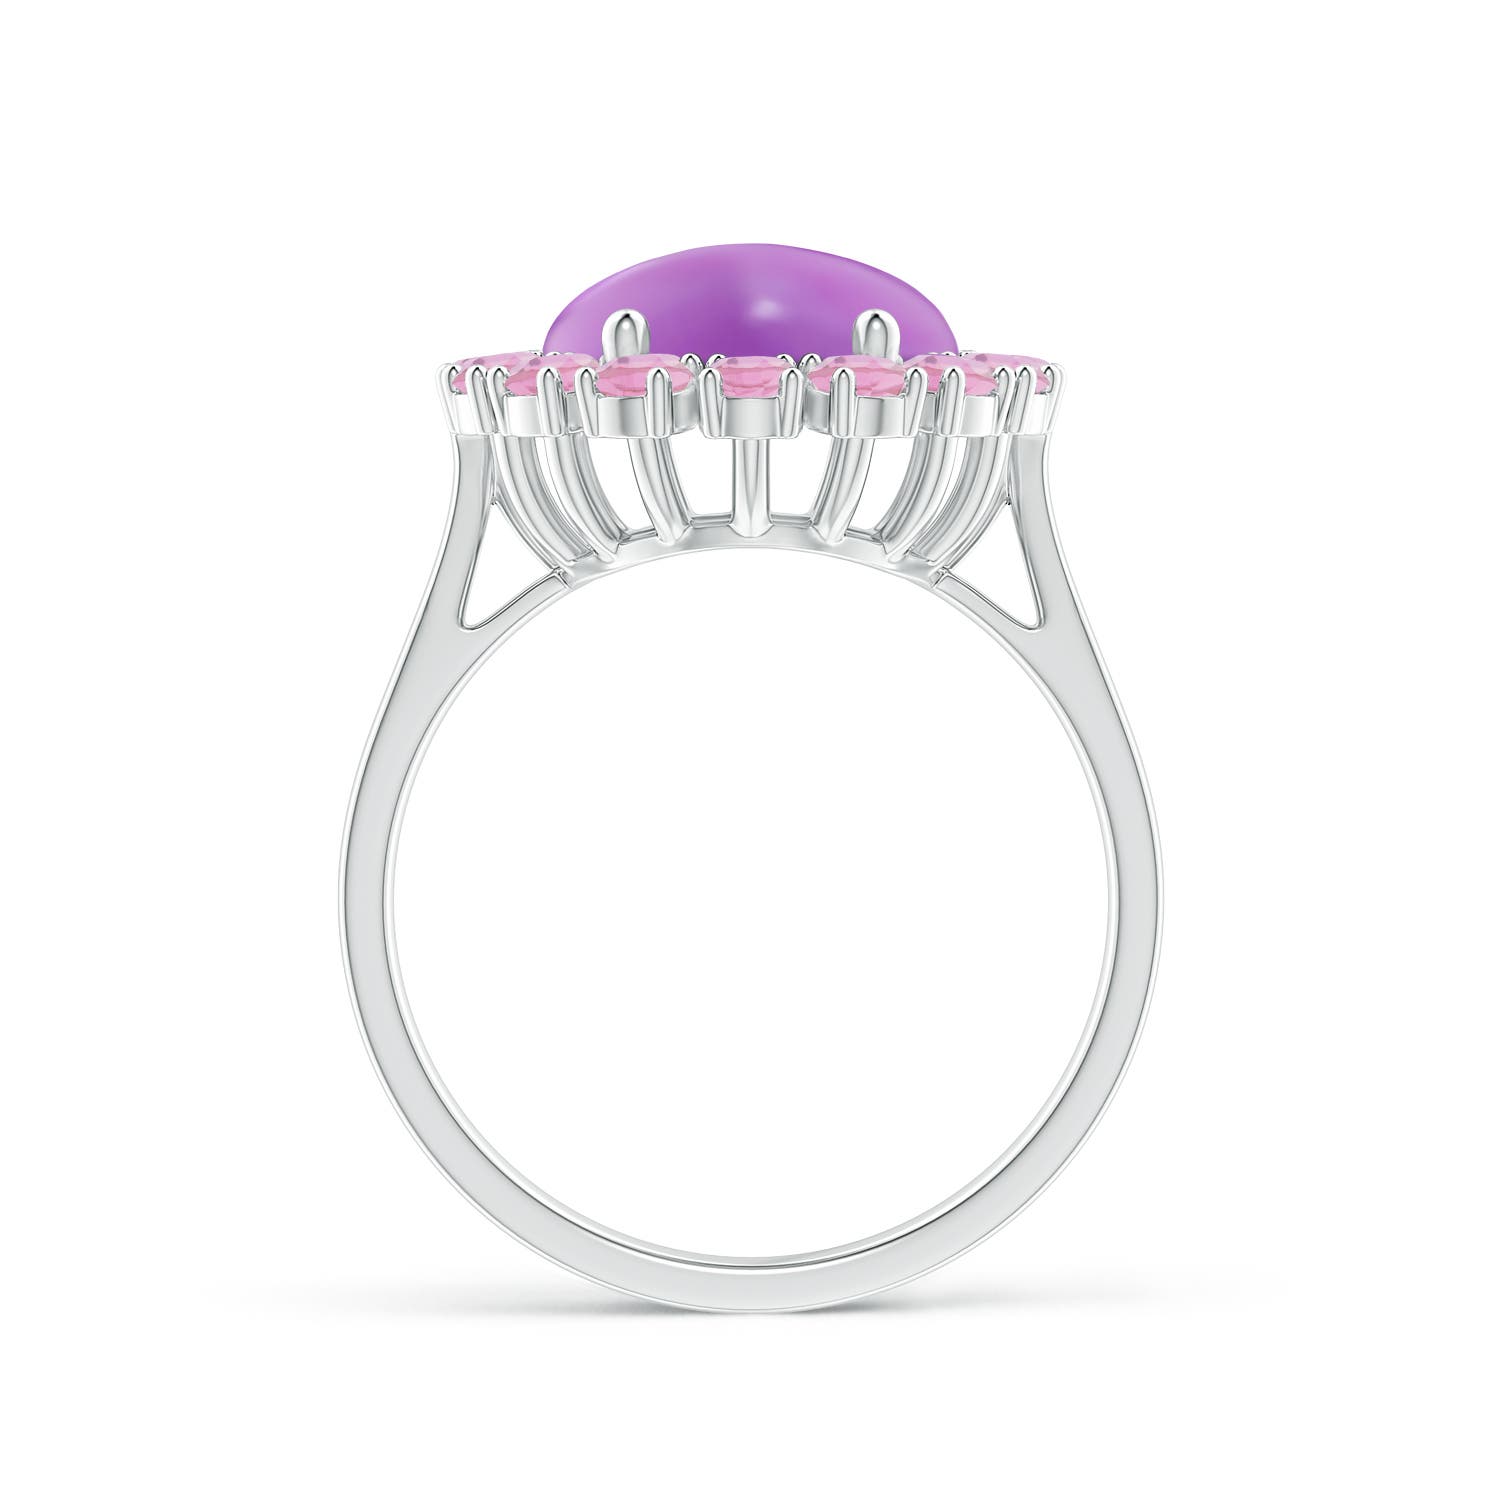 A - Amethyst / 7.26 CT / 14 KT White Gold